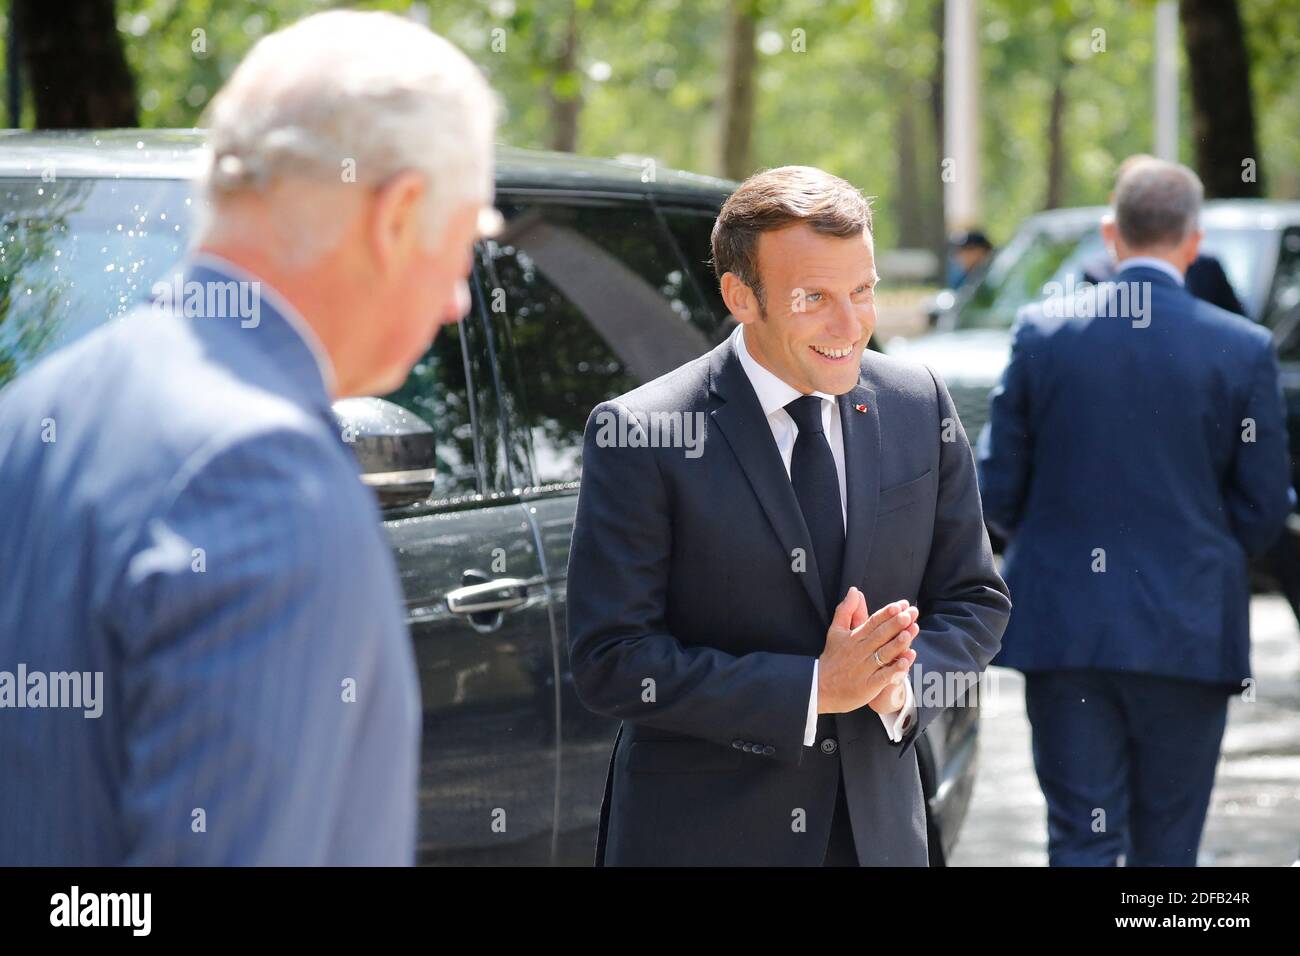 French President Emmanuel Macron gestures as he arrives with Britain's Prince Charles, Prince of Wales (L) to lay a wreath at the statue of former French president Charles de Gaulle at Carlton Gardens in central London on June 18, 2020 to mark the anniversary of former de Gaulle's appeal to French people to resist the Nazi occupation. - Macron visited London on June 18 to commemorate the 80th anniversary of former French president Charles de Gaulle's appeal to French people to resist the Nazi occupation during World War II. Photo by Tolga AKMEN/Pool/ABACAPRESS.COM Stock Photo